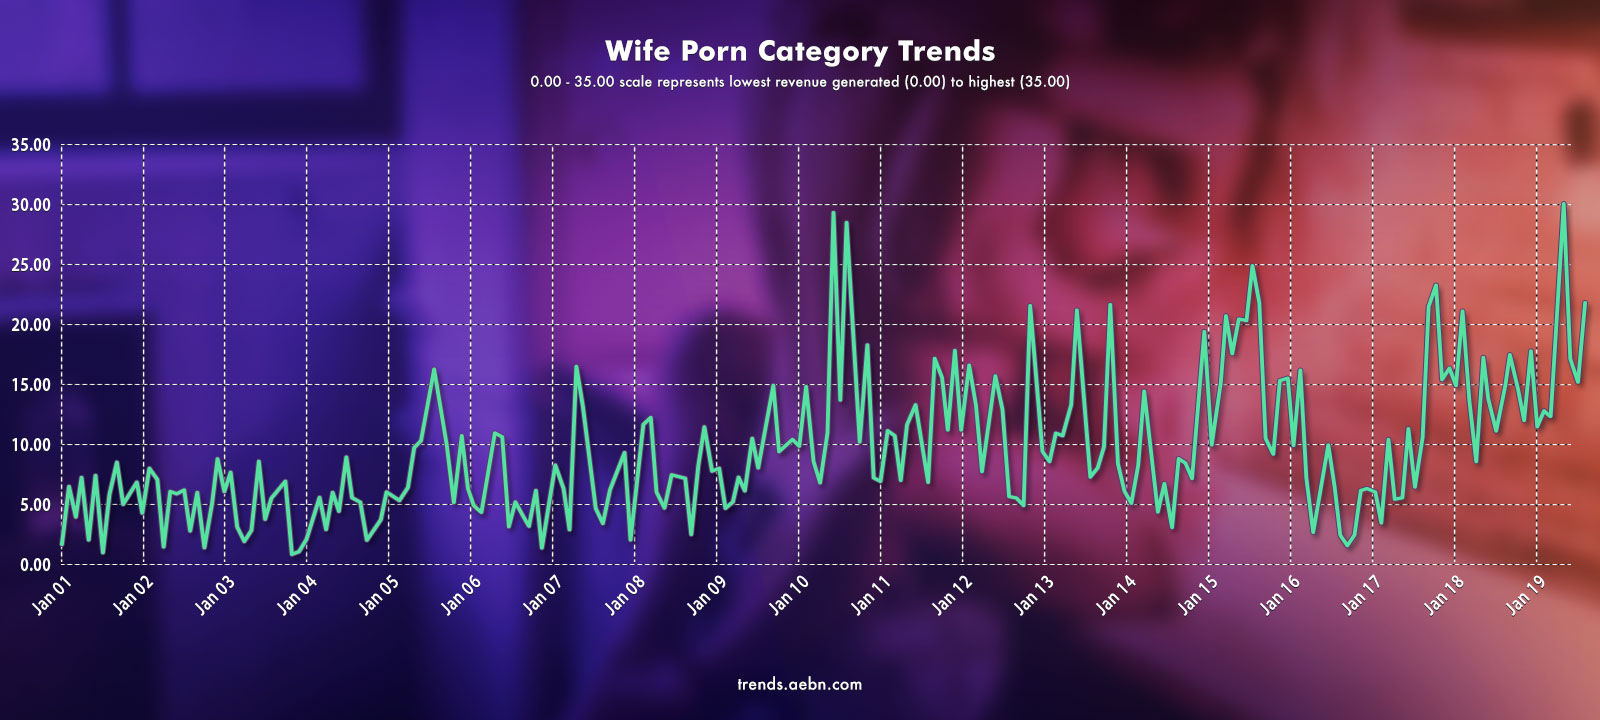 Wife Porn Category Graphic